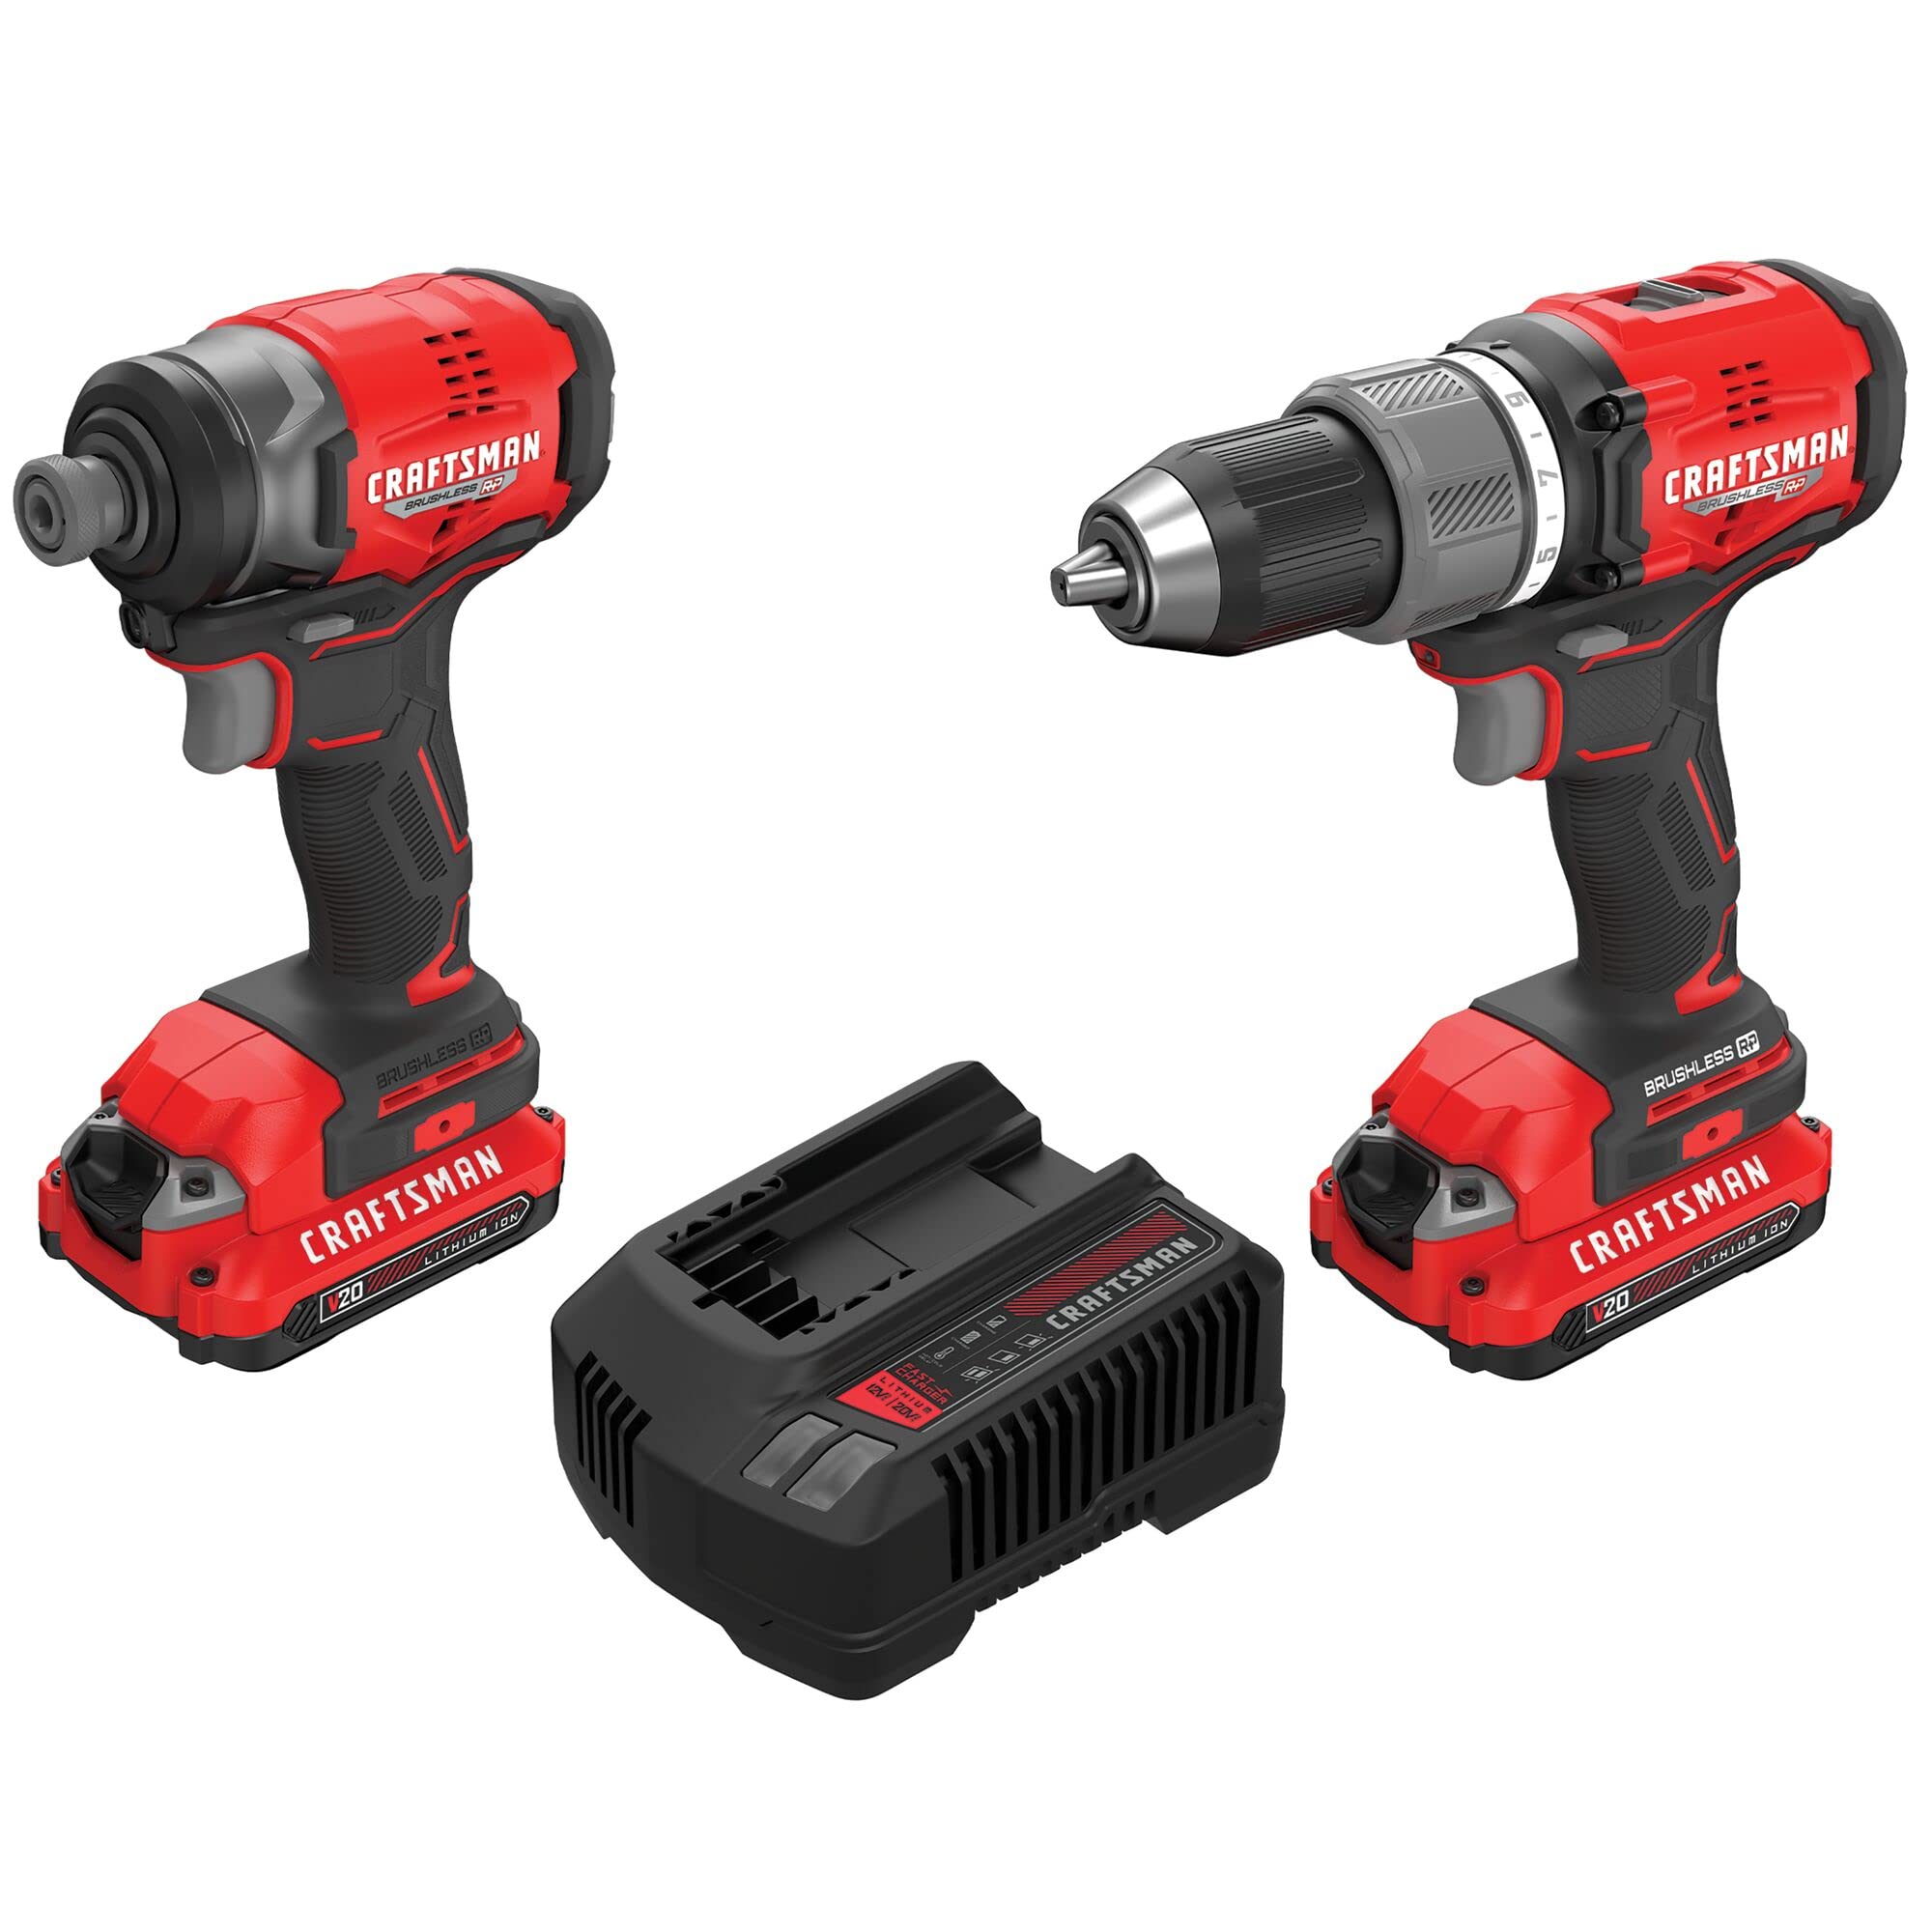 CRAFTSMAN V20 RP Cordless Drill and Impact Driver, Power Tool Combo Kit, 2 Batteries and Charger Included (CMCK211C2)